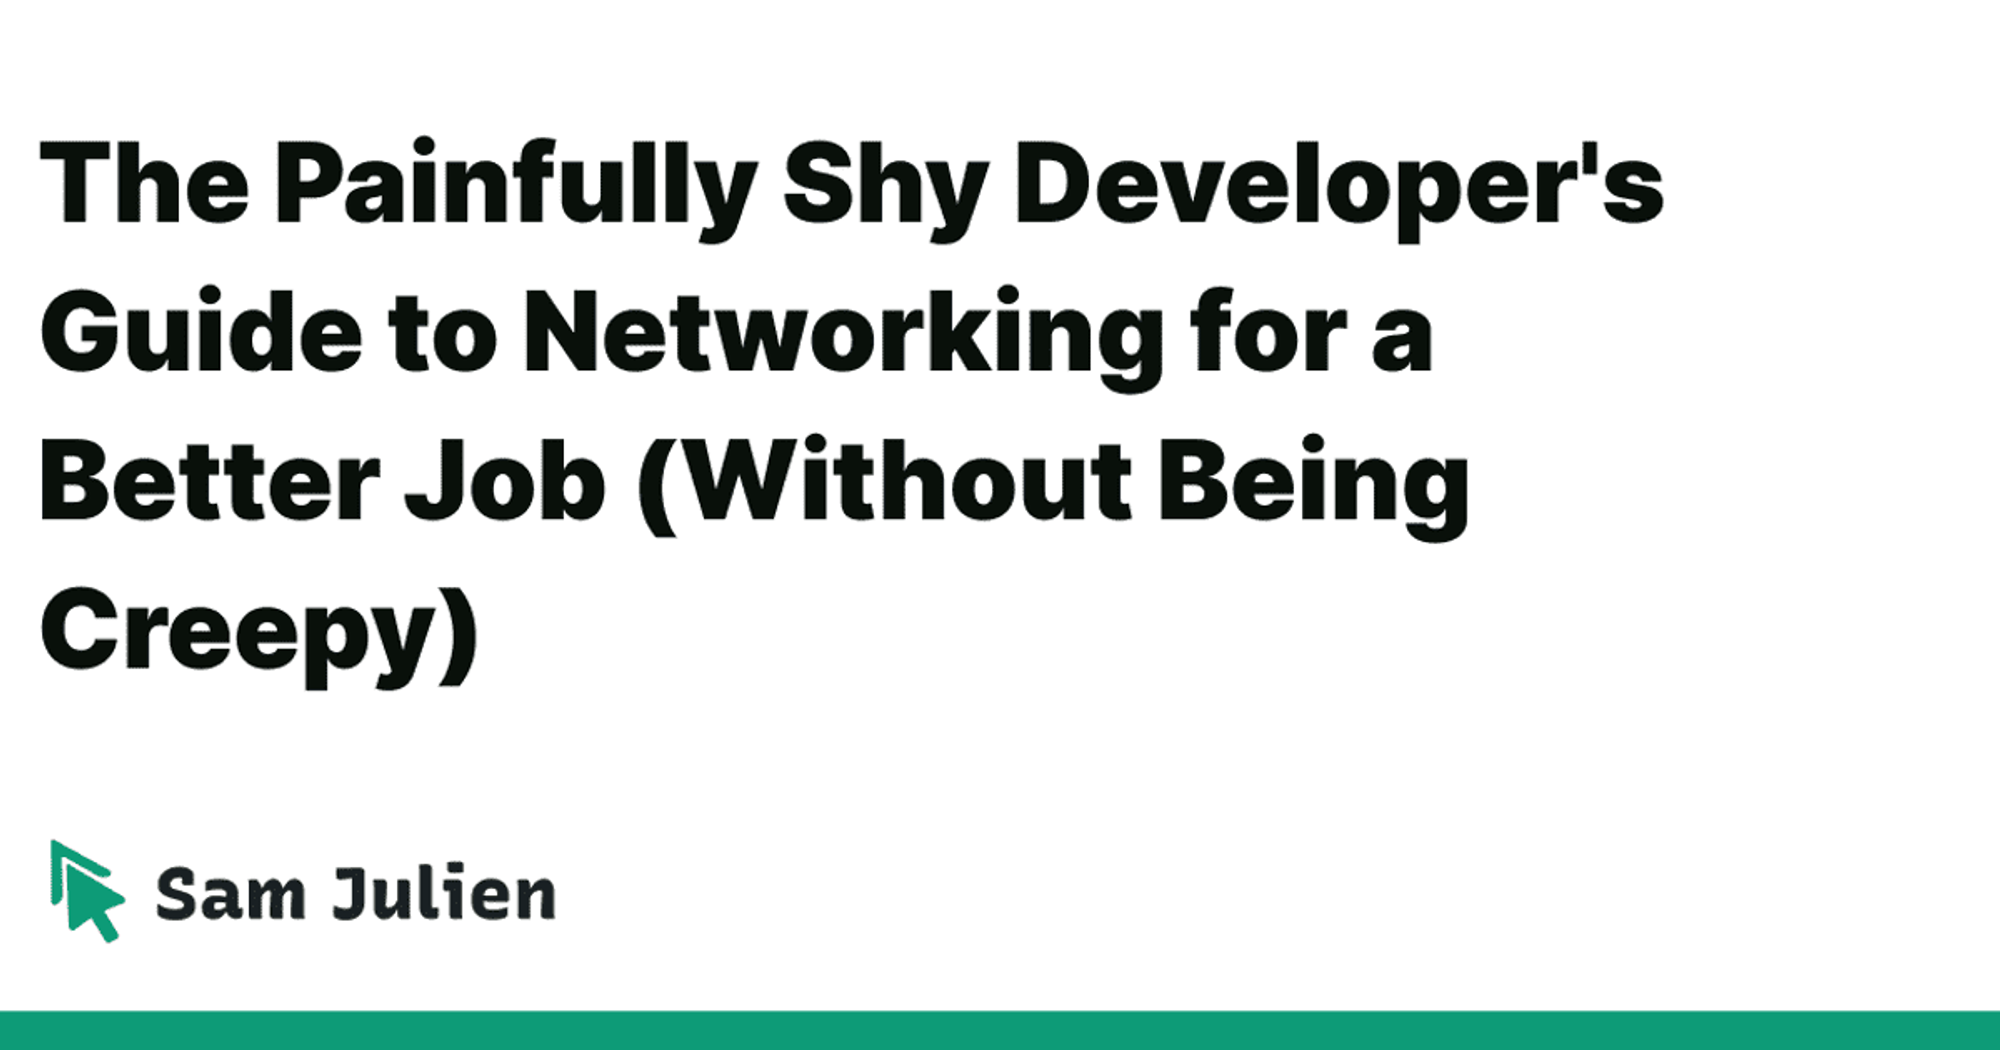 The Painfully Shy Developer's Guide to Networking for a Better Job (Without Being Creepy)